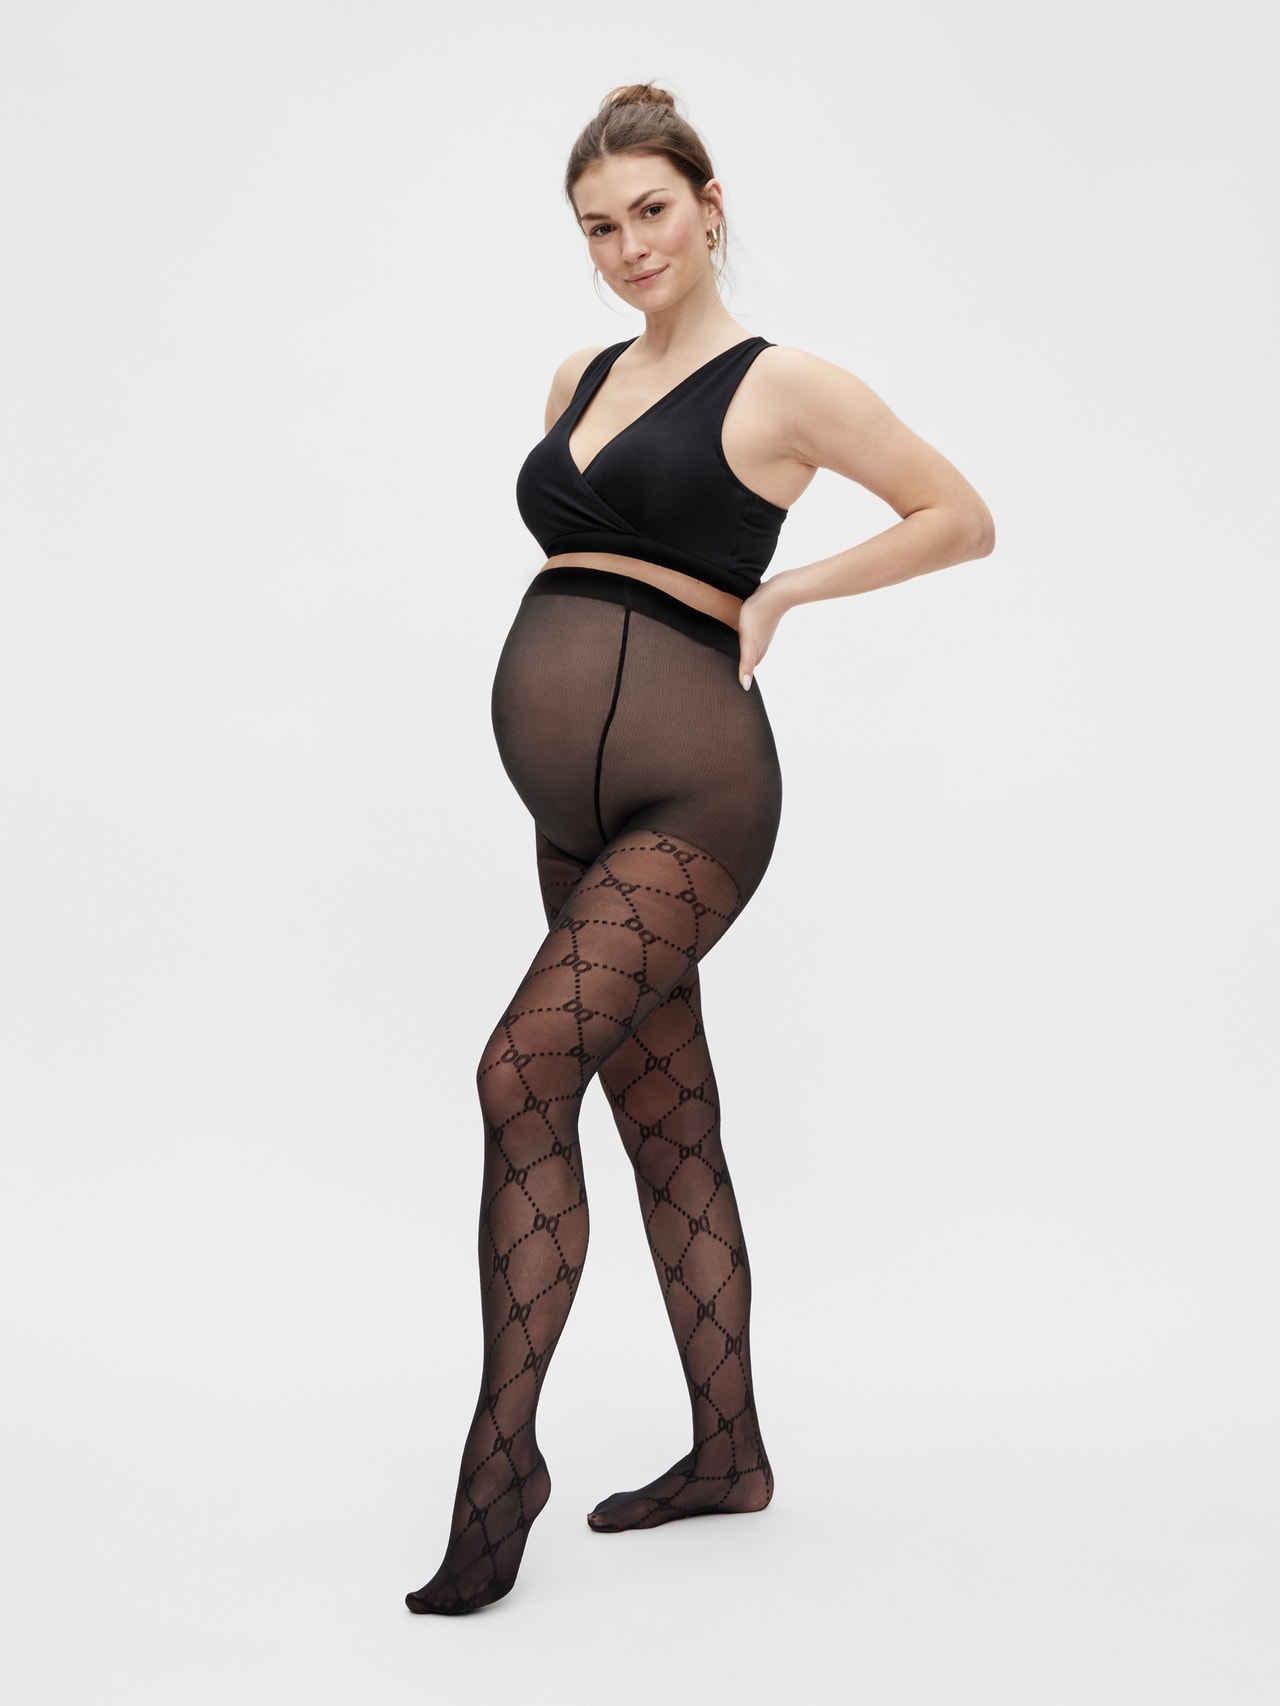 https://images.mamalicious.com/20016316/4075248/005/mama-licious-2-packmaternity-tights-black.jpg?v=d31e39a06f989bb6f7bbca0d1bbe52f7&format=webp&width=1280&quality=90&key=25-0-3